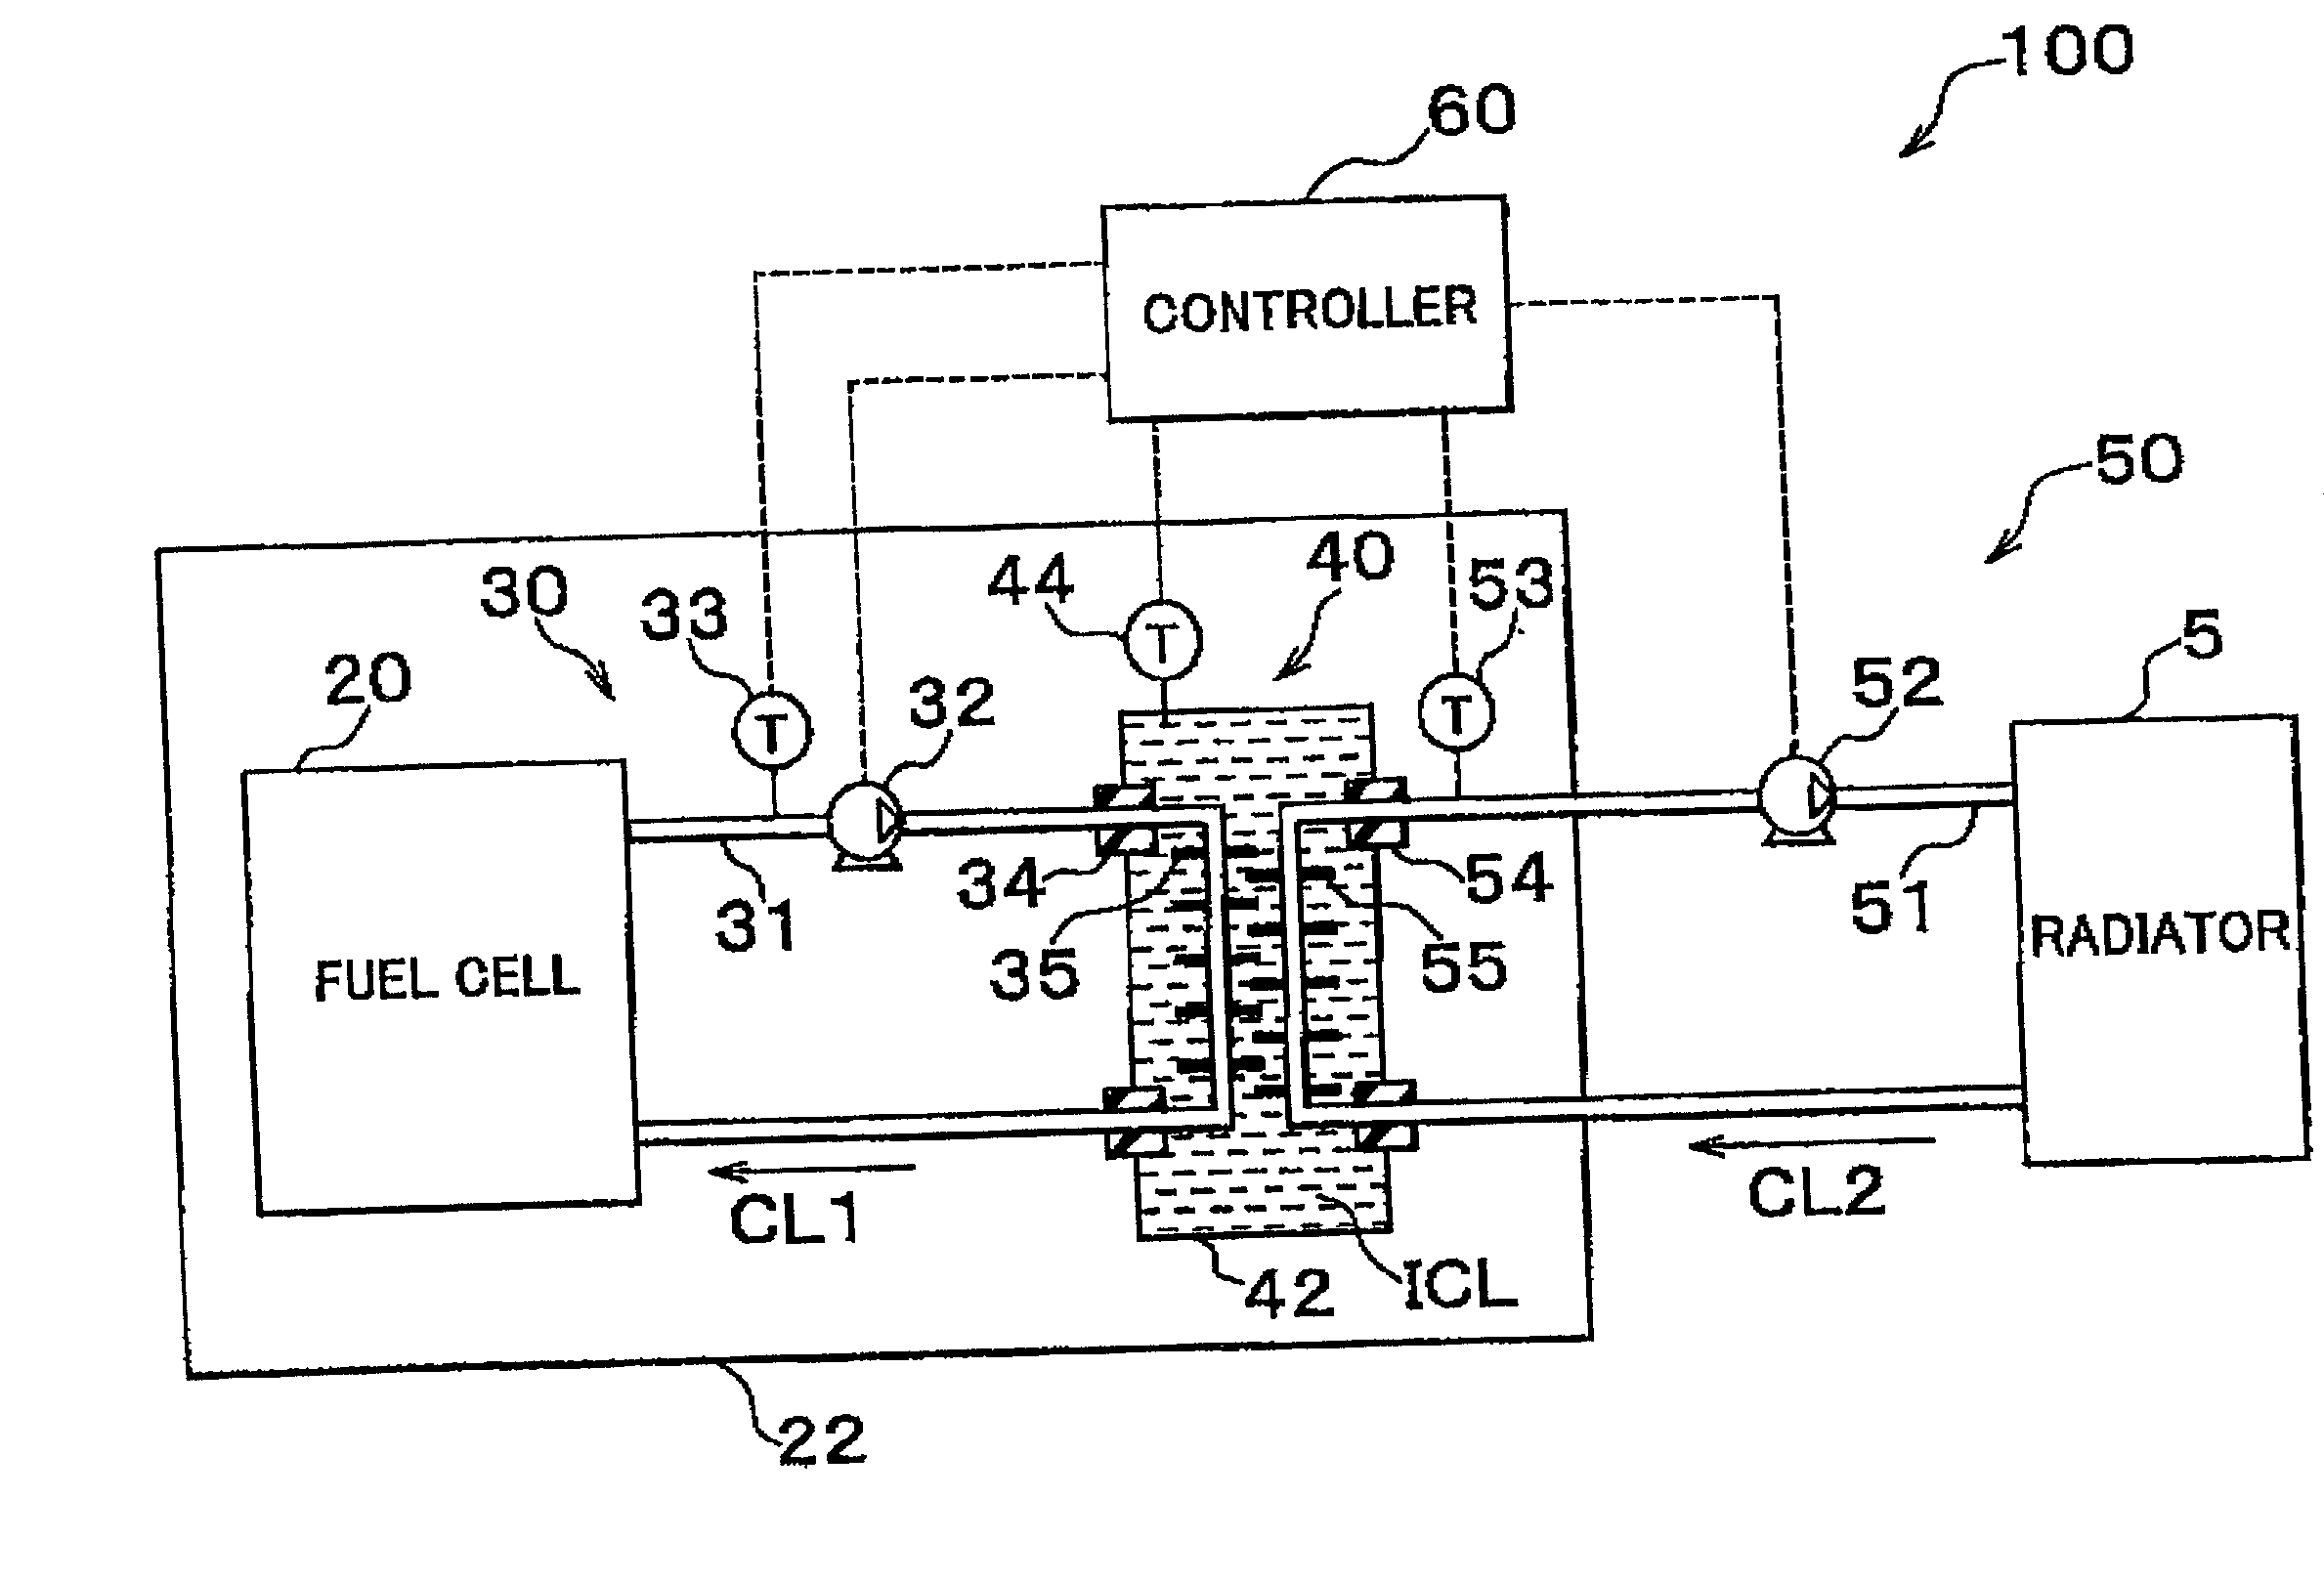 Fuel cell system having cooling apparatus